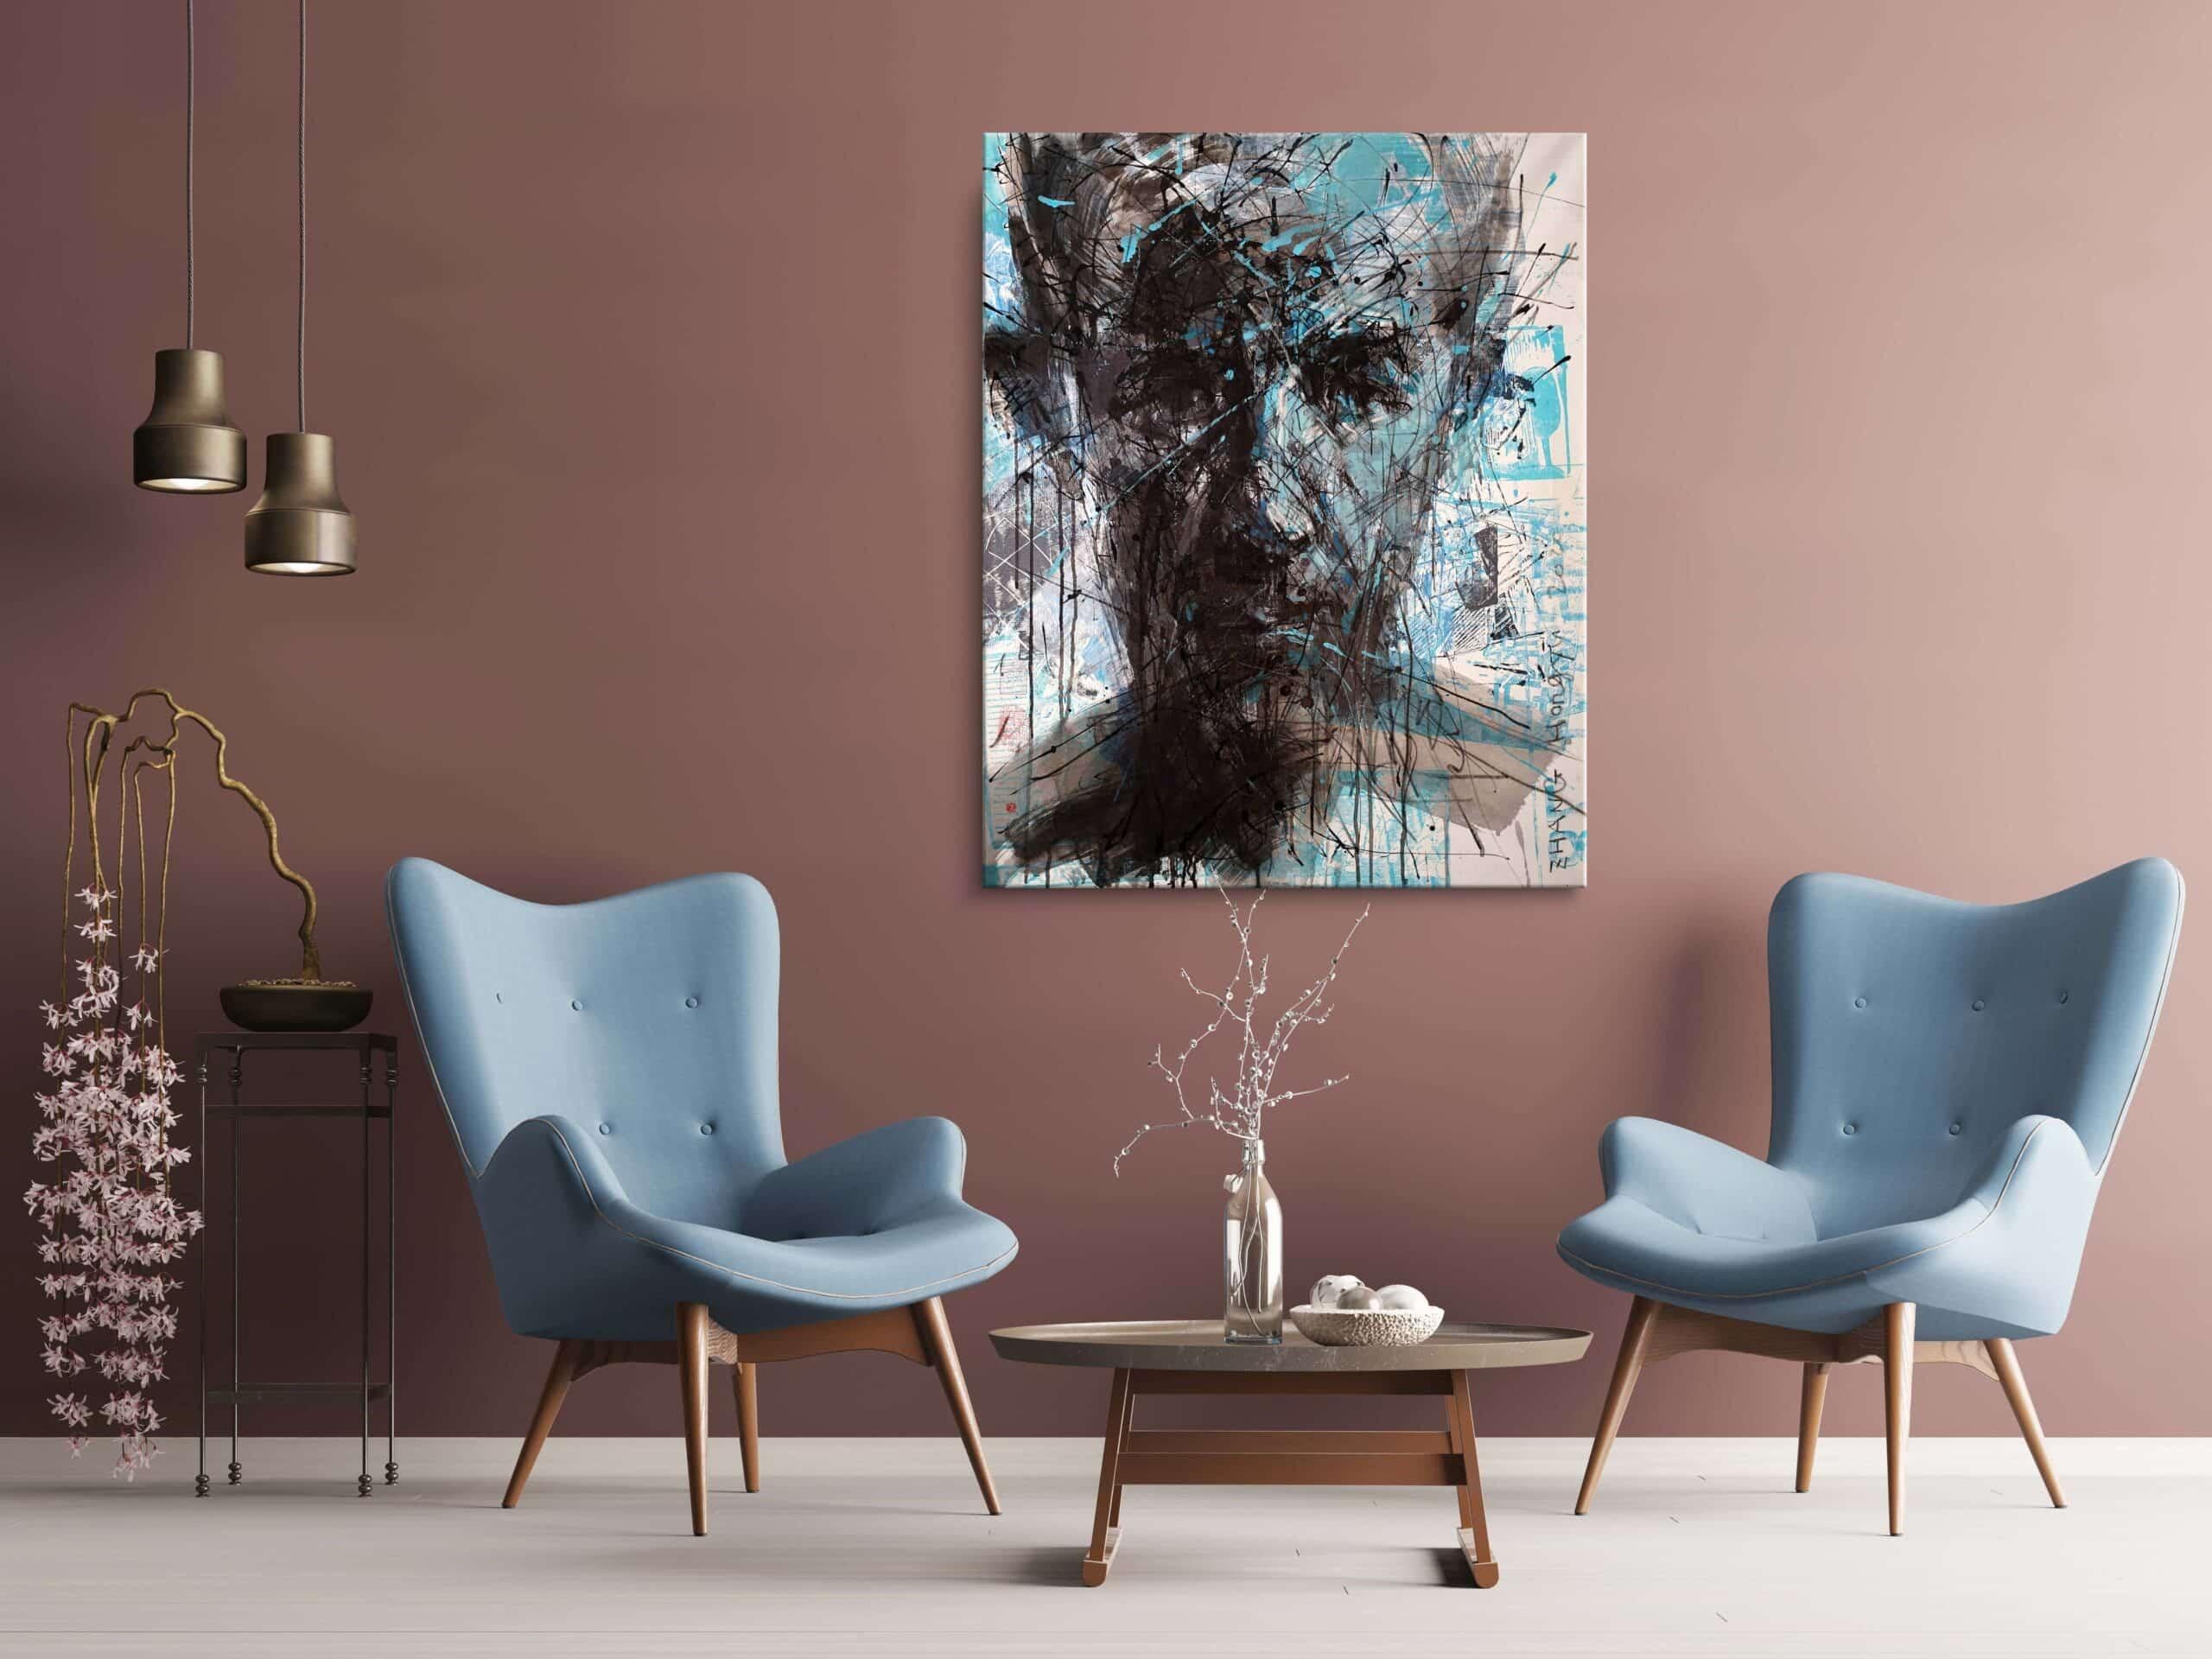 No. 196 by Hongyu Zhang - Contemporary portrait painting, blue, abstract - Painting by Zhang Hongyu